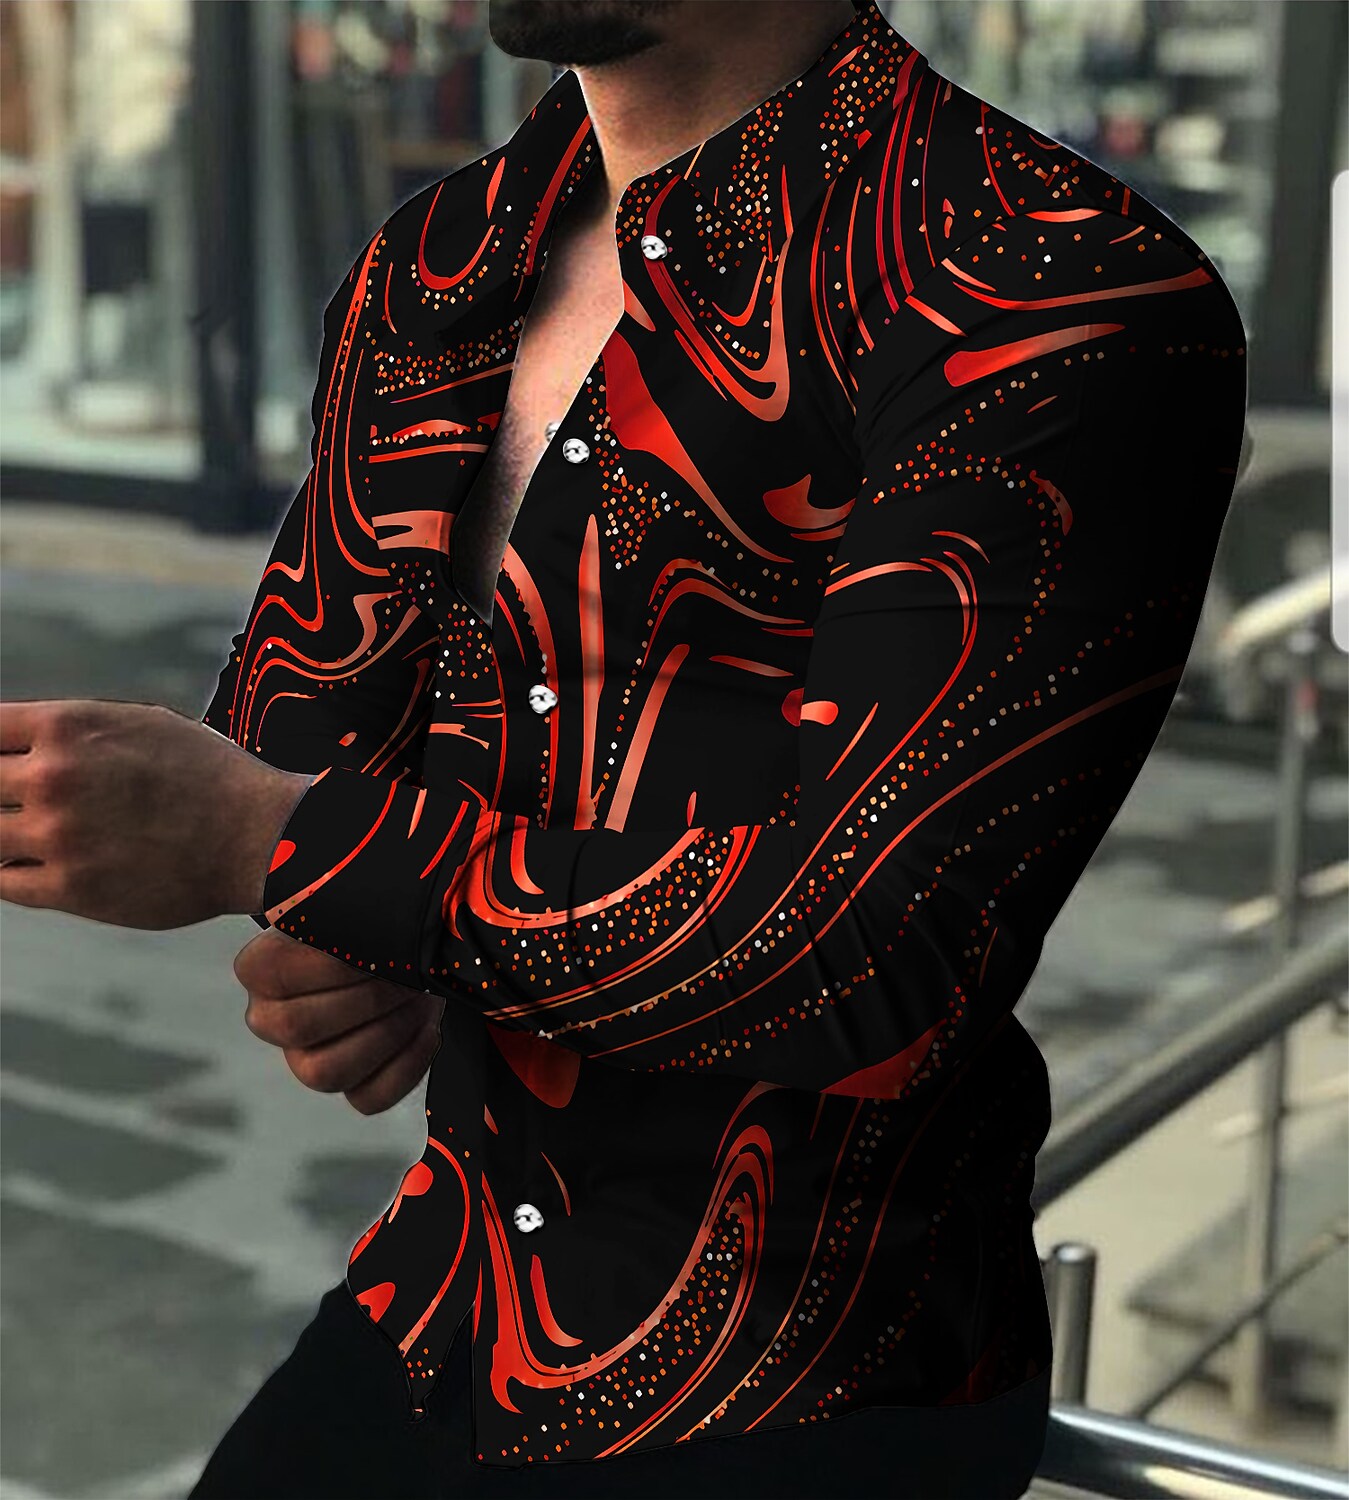 Men's Shirt 3D Print Graphic Patterned Turndown Daily Holiday 3D Print Button-Down Long Sleeve Tops Casual Fashion Breathable Black / Red Black / Gray Blue